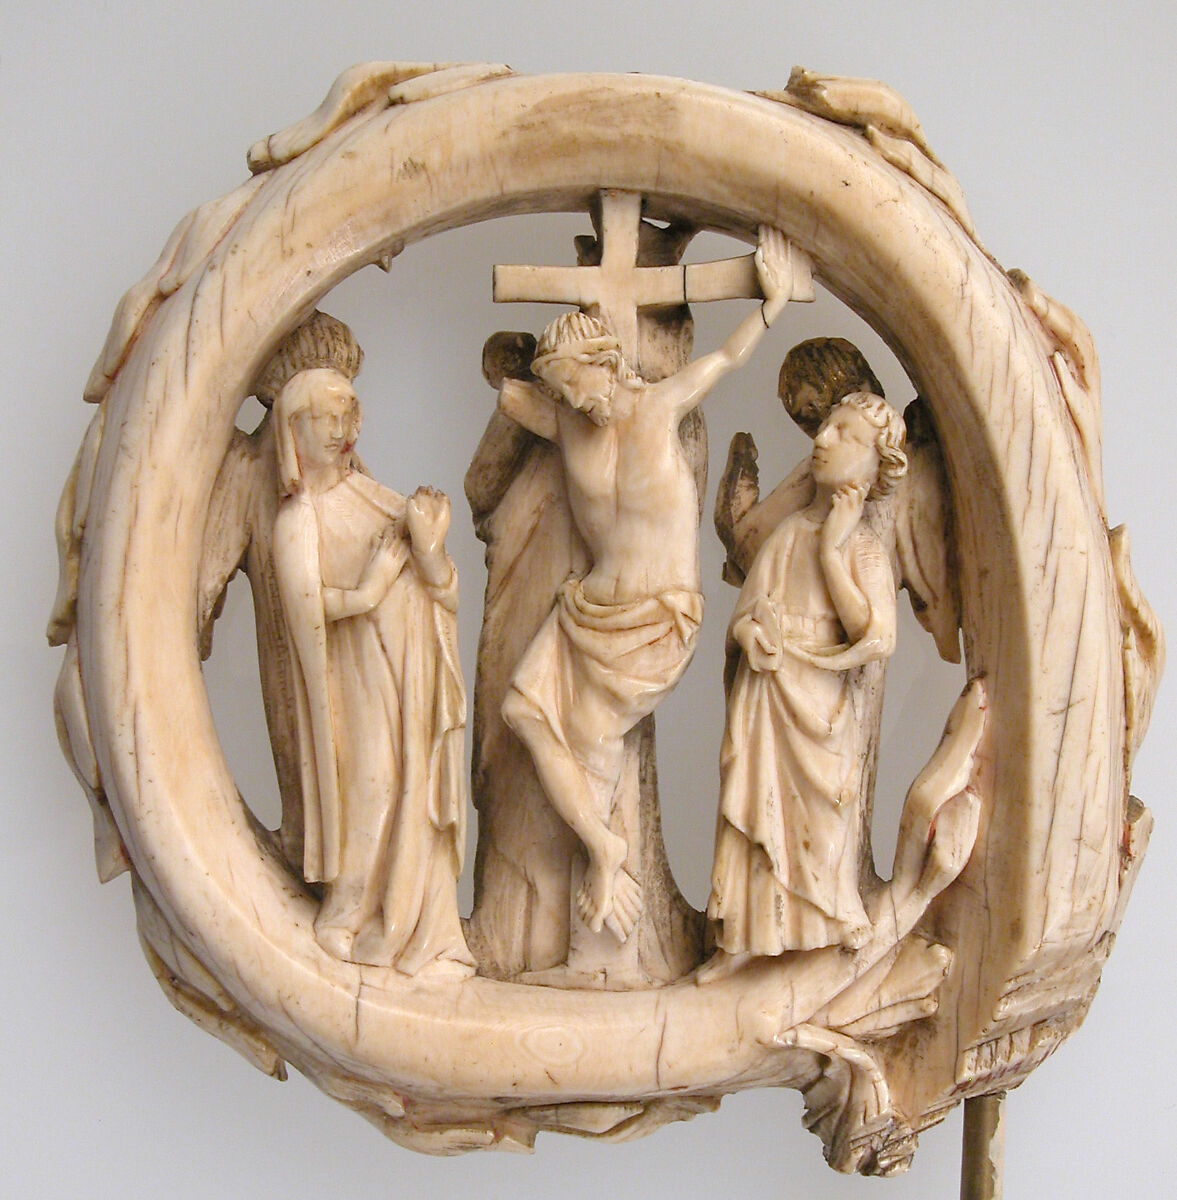 Crozier Head with the Crucifixion and the Virgin and Child, Elephant ivory, with traces of paint and gilding, French 